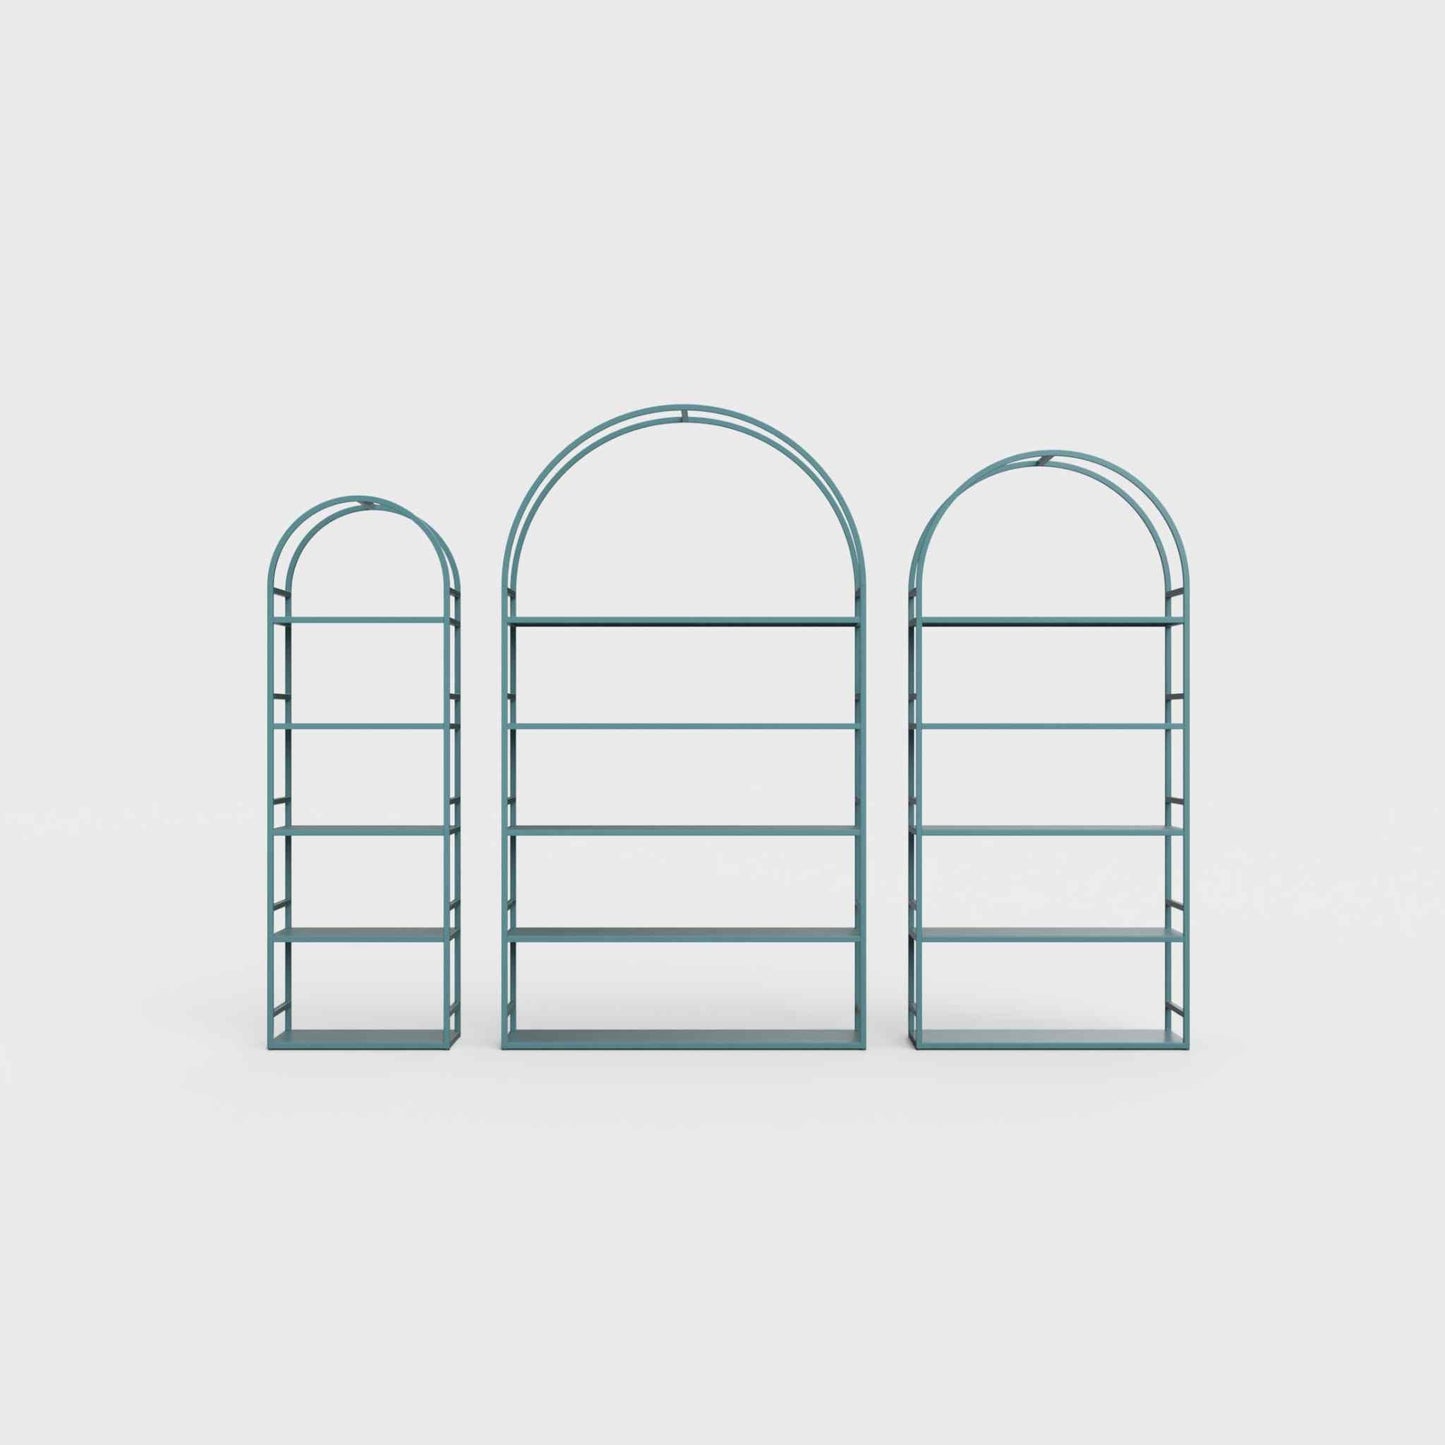 Arched bookcase Arkada, available in Switzerland through ÉTAUDORÉ, made from highest quality powdered coated steel in turquoise blue-green color